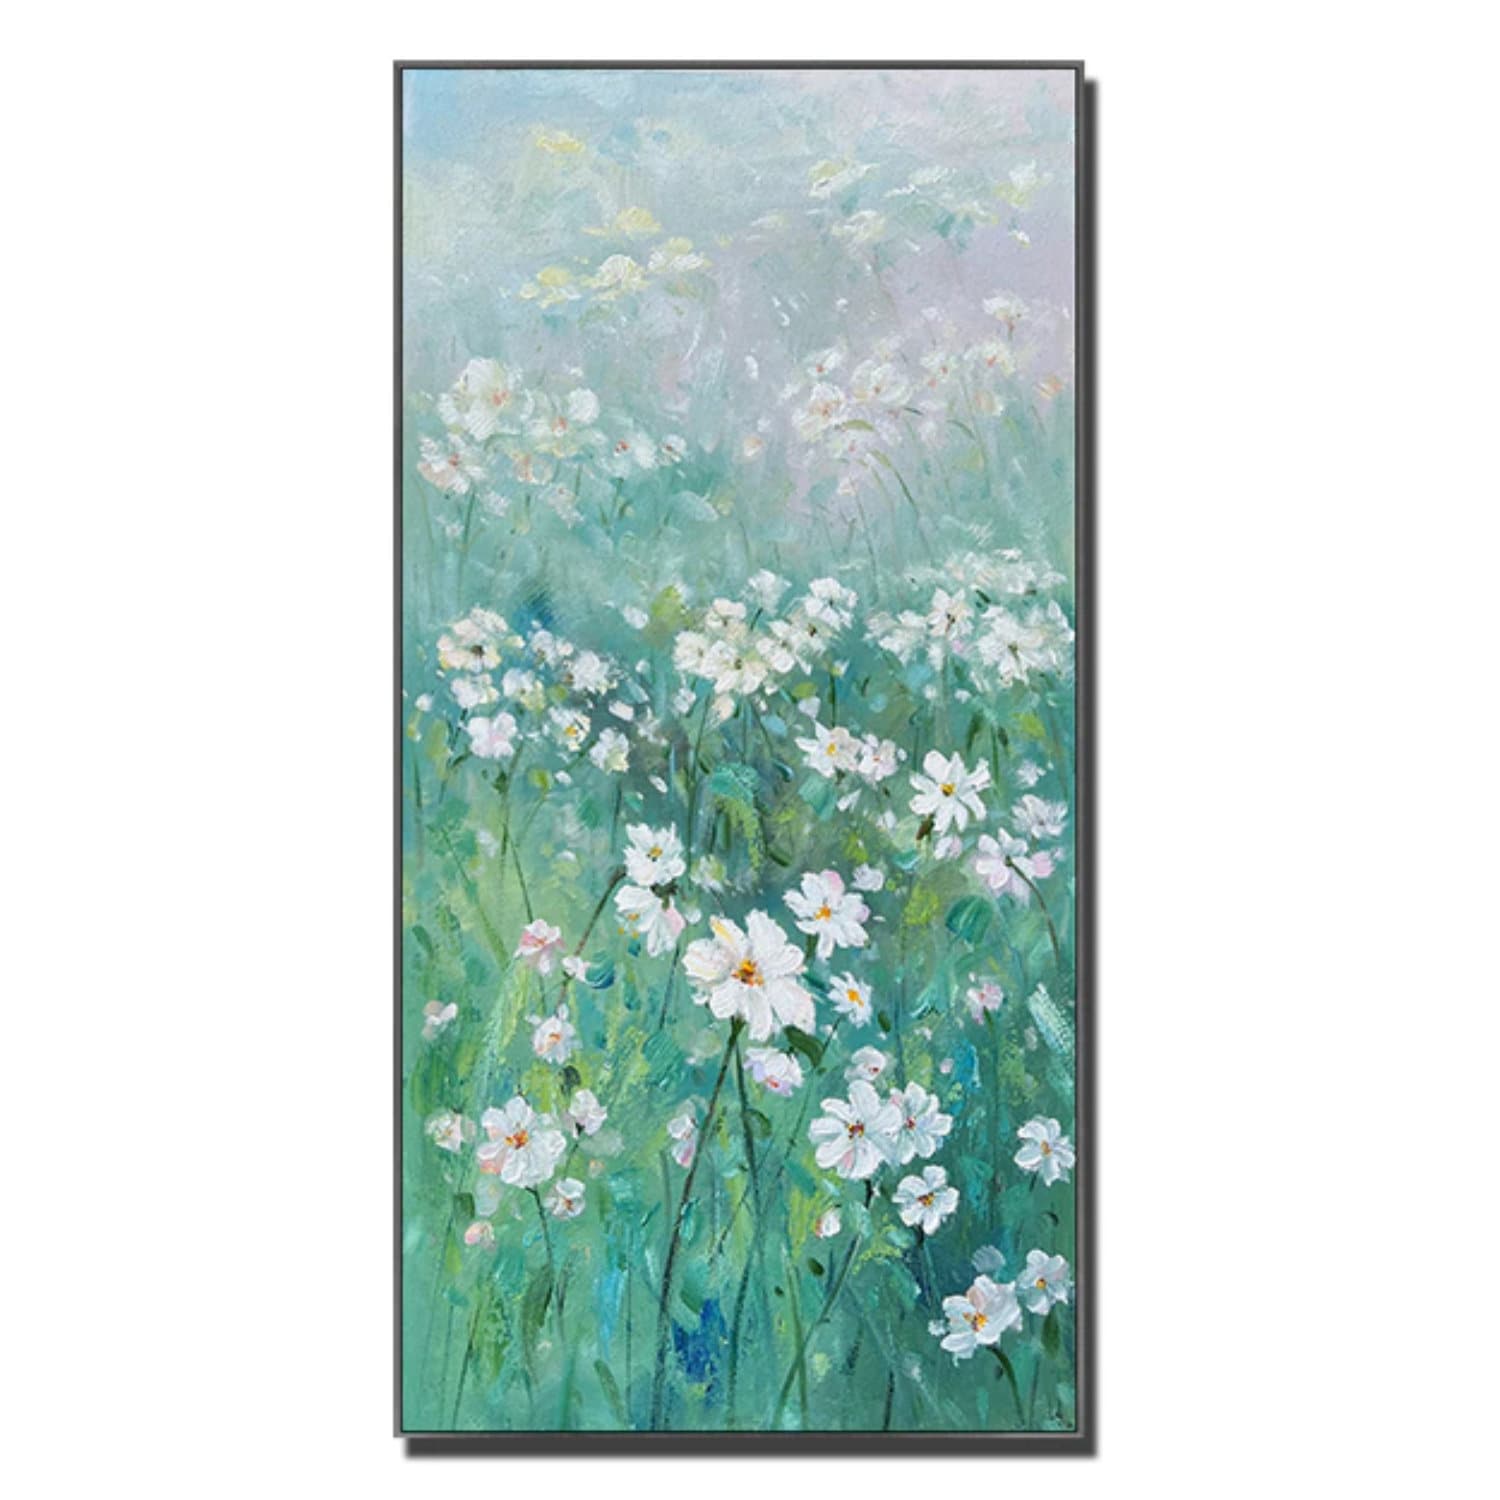 Large White Daisy Flowers 100% Hand Painted Art